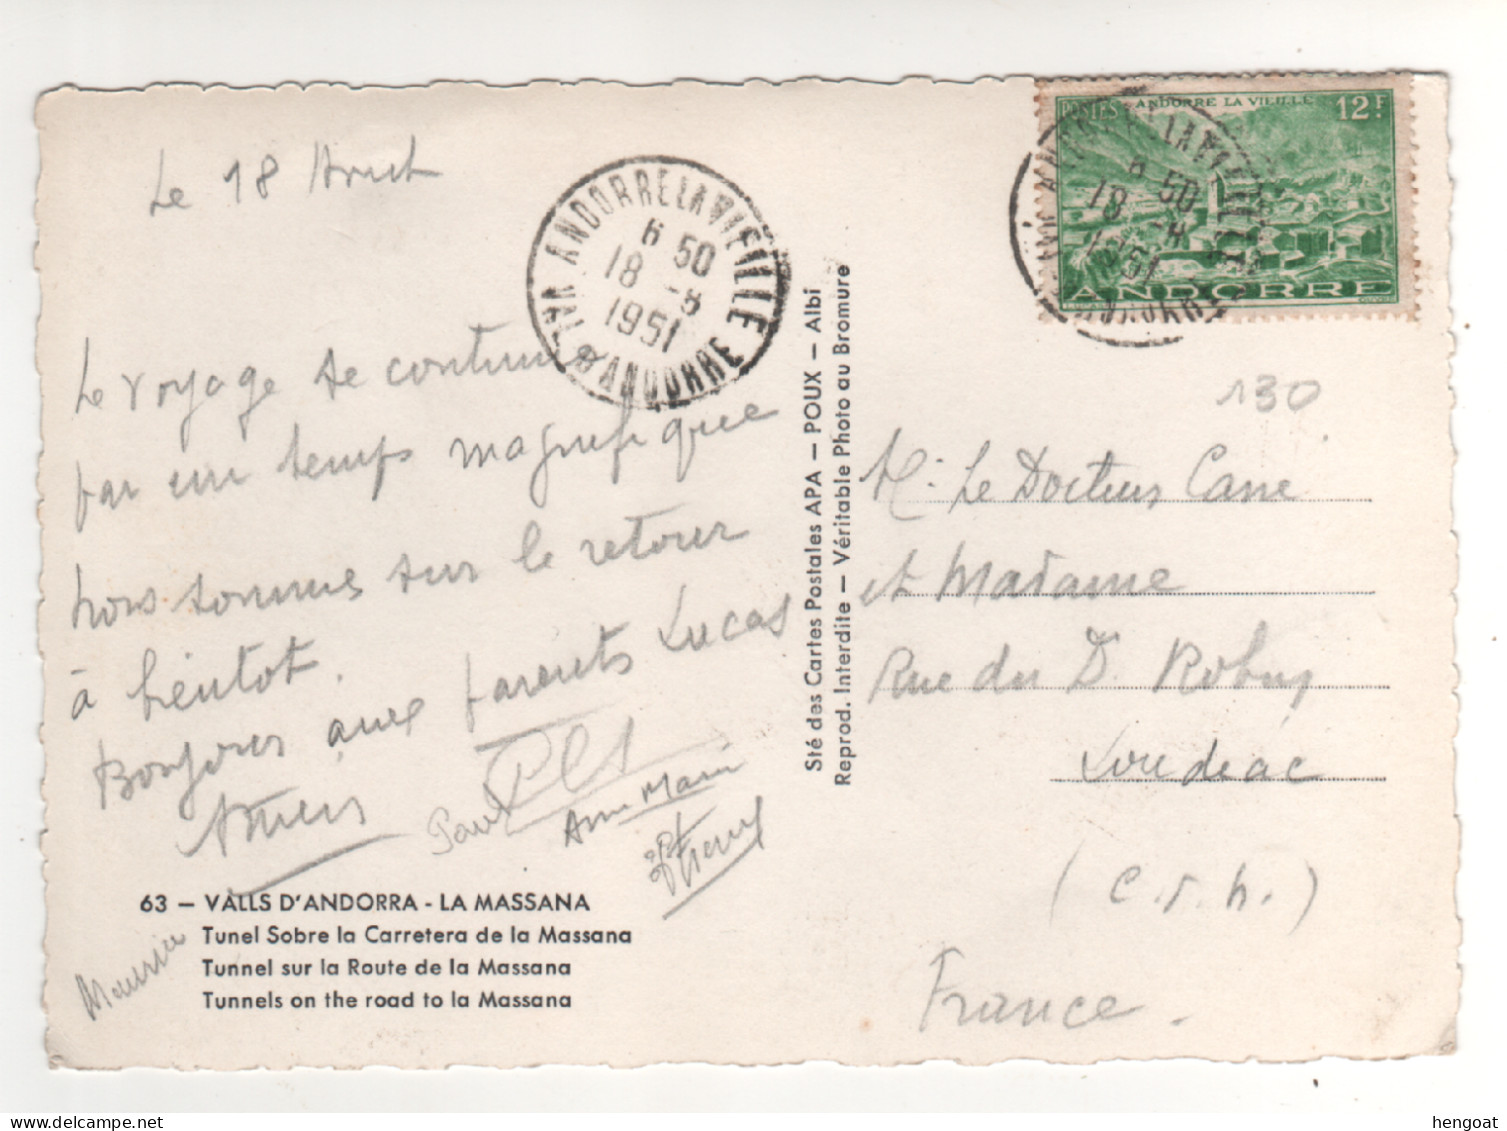 Timbre , Stamp Yvert N° 130 Sur Cp , Carte , Postcard Du 18/08/51 - Covers & Documents